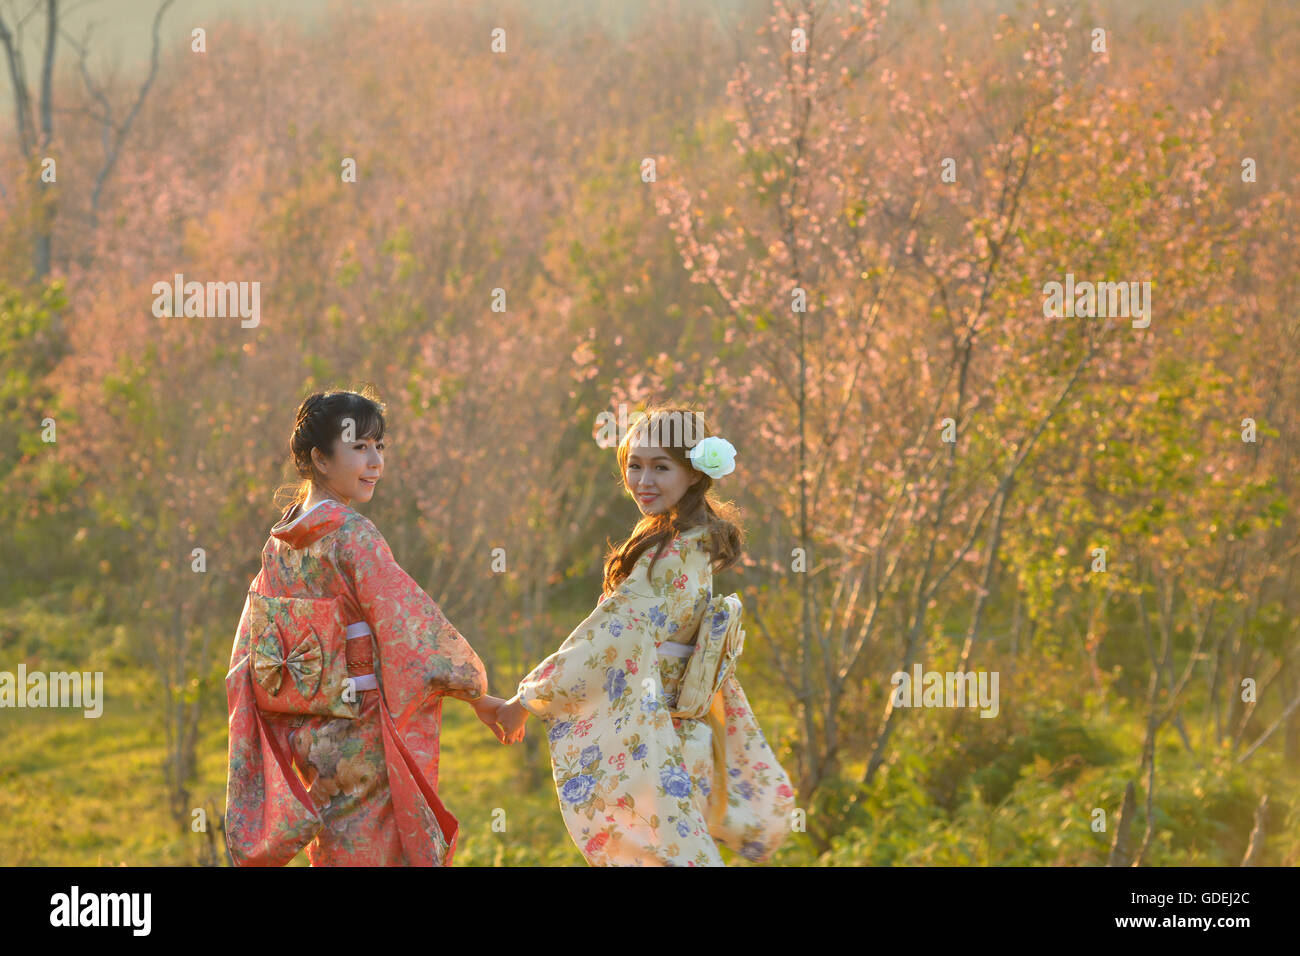 Two smiling women holding hands in cherry blossom orchard wearing traditional Japanese clothing Stock Photo